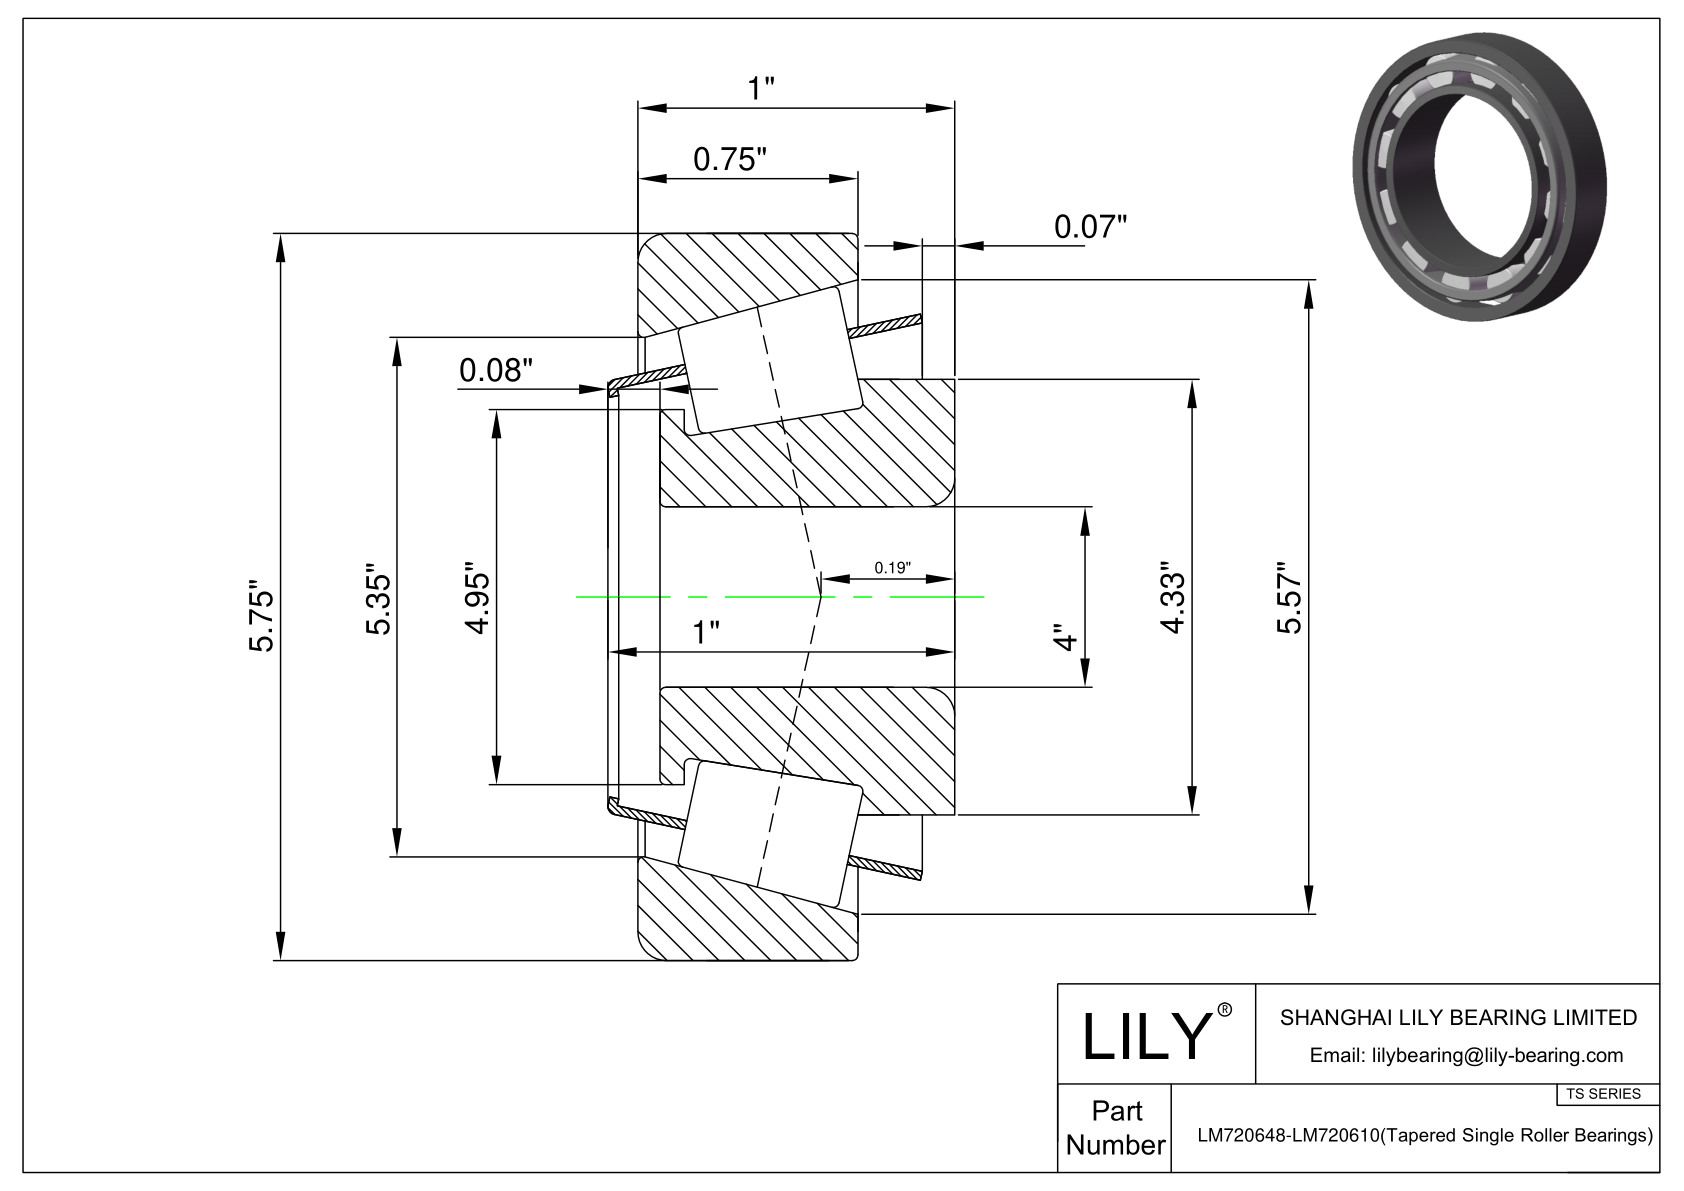 LM720648-LM720610 TS (Tapered Single Roller Bearings) (Imperial) cad drawing